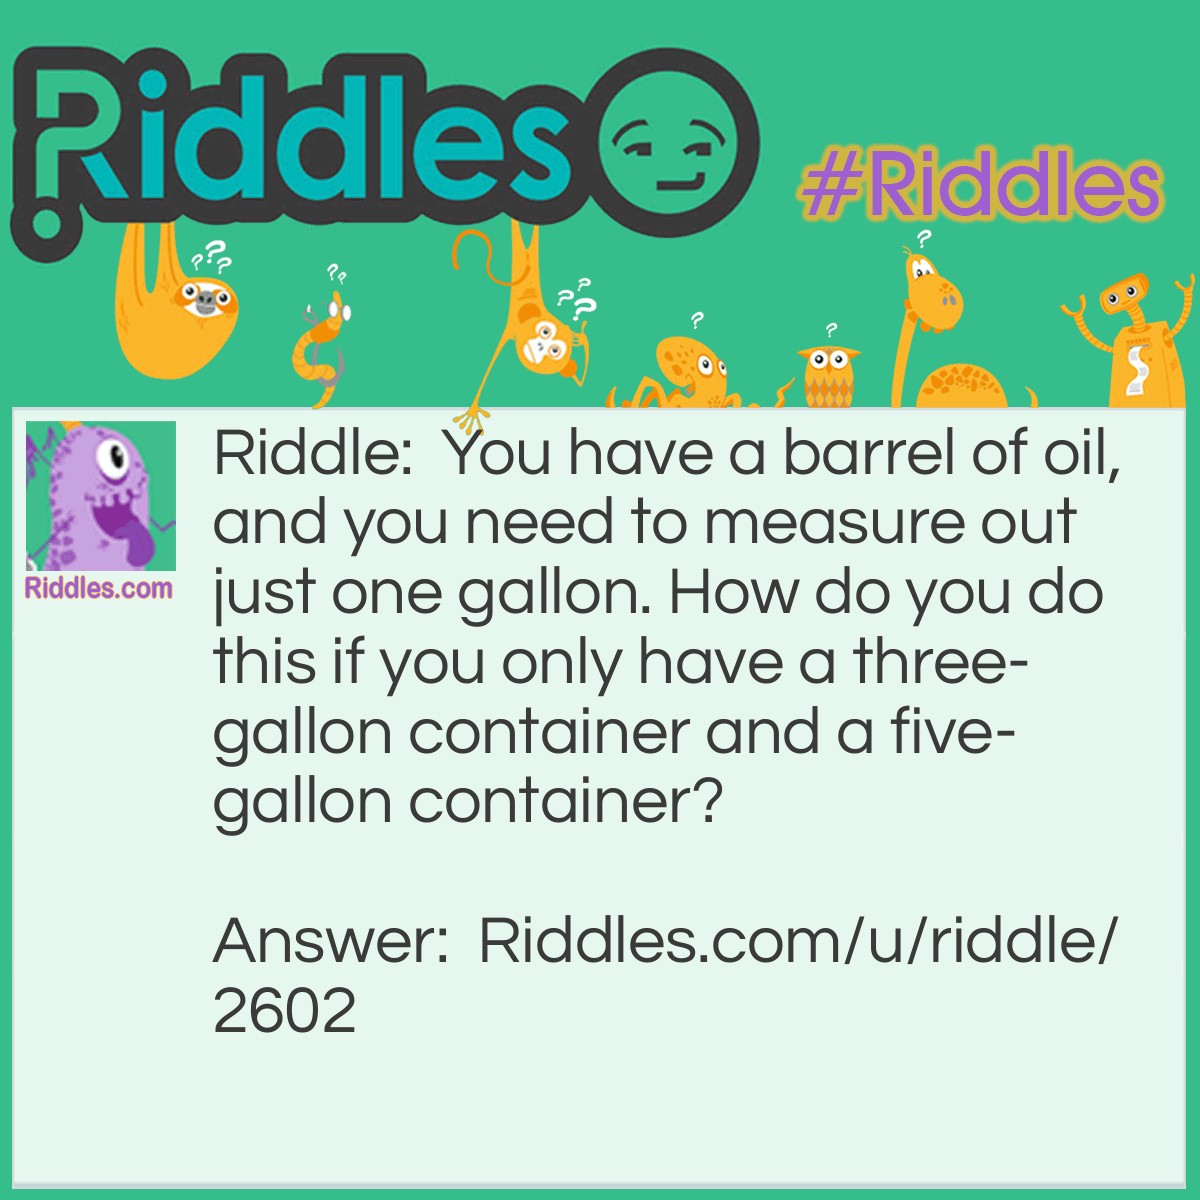 Riddle: You have a barrel of oil, and you need to measure out just one gallon. How do you do this if you only have a three-gallon container and a five-gallon container? Answer: Fill the 3-gallon container with oil and pour it into the 5-gallon container. Then fill the 3-gallon container again and use it to fill the 5-gallon container the rest of the way. Out of the 3-gallon oil, 2-gallon will be required to fill the 5-gallon container completely. Hence one gallon will be left in the 3-gallon container.